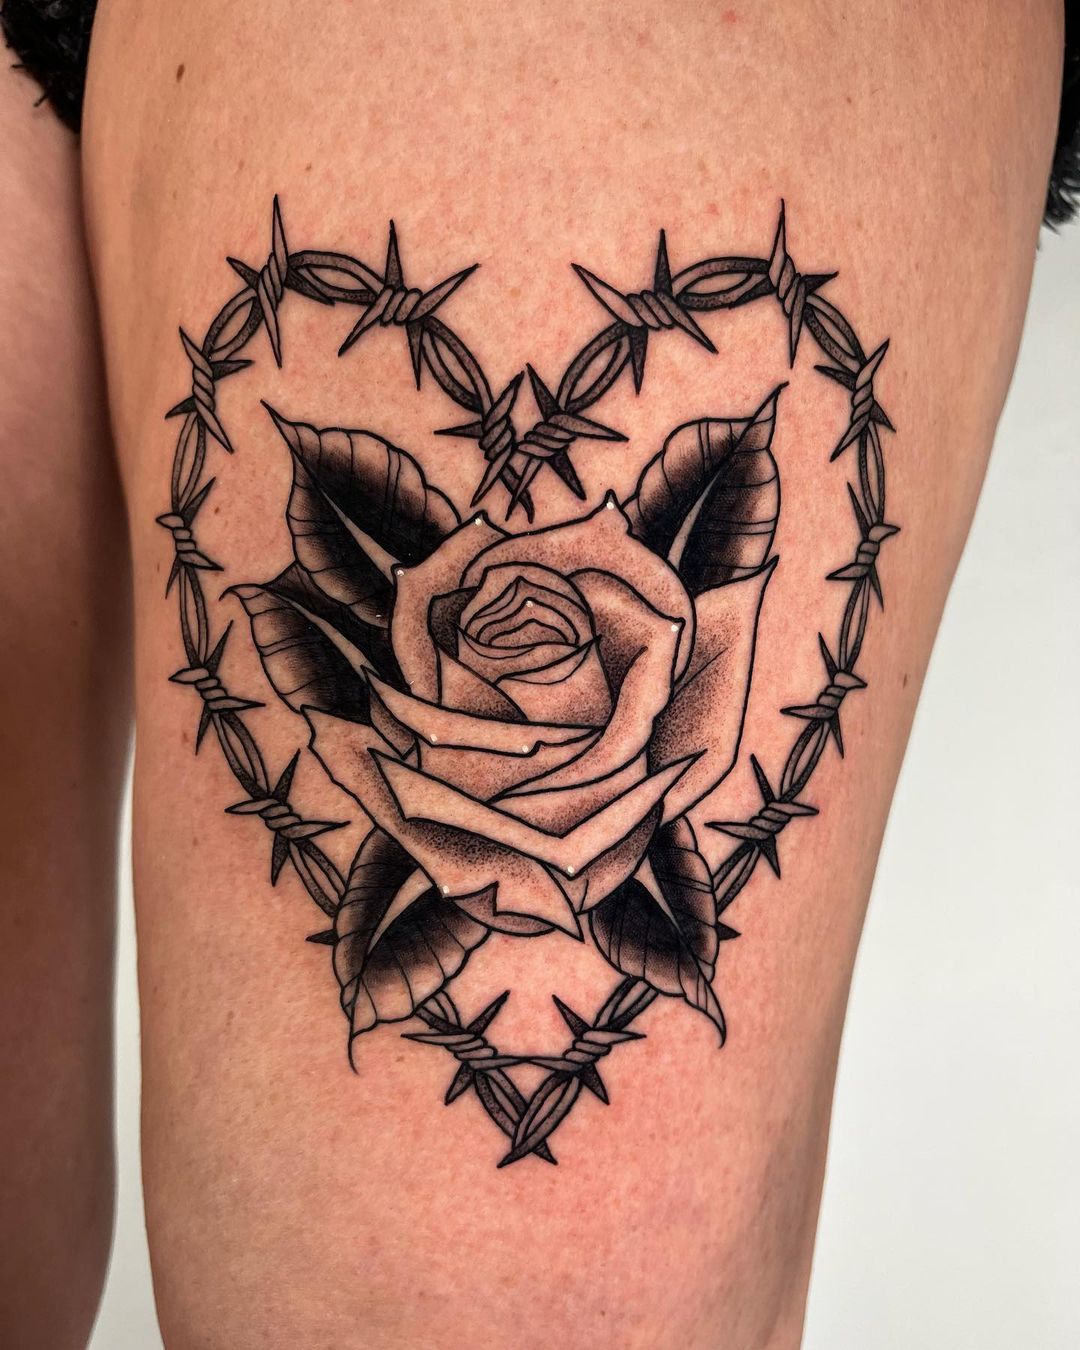 Barbed wire rose tattoo